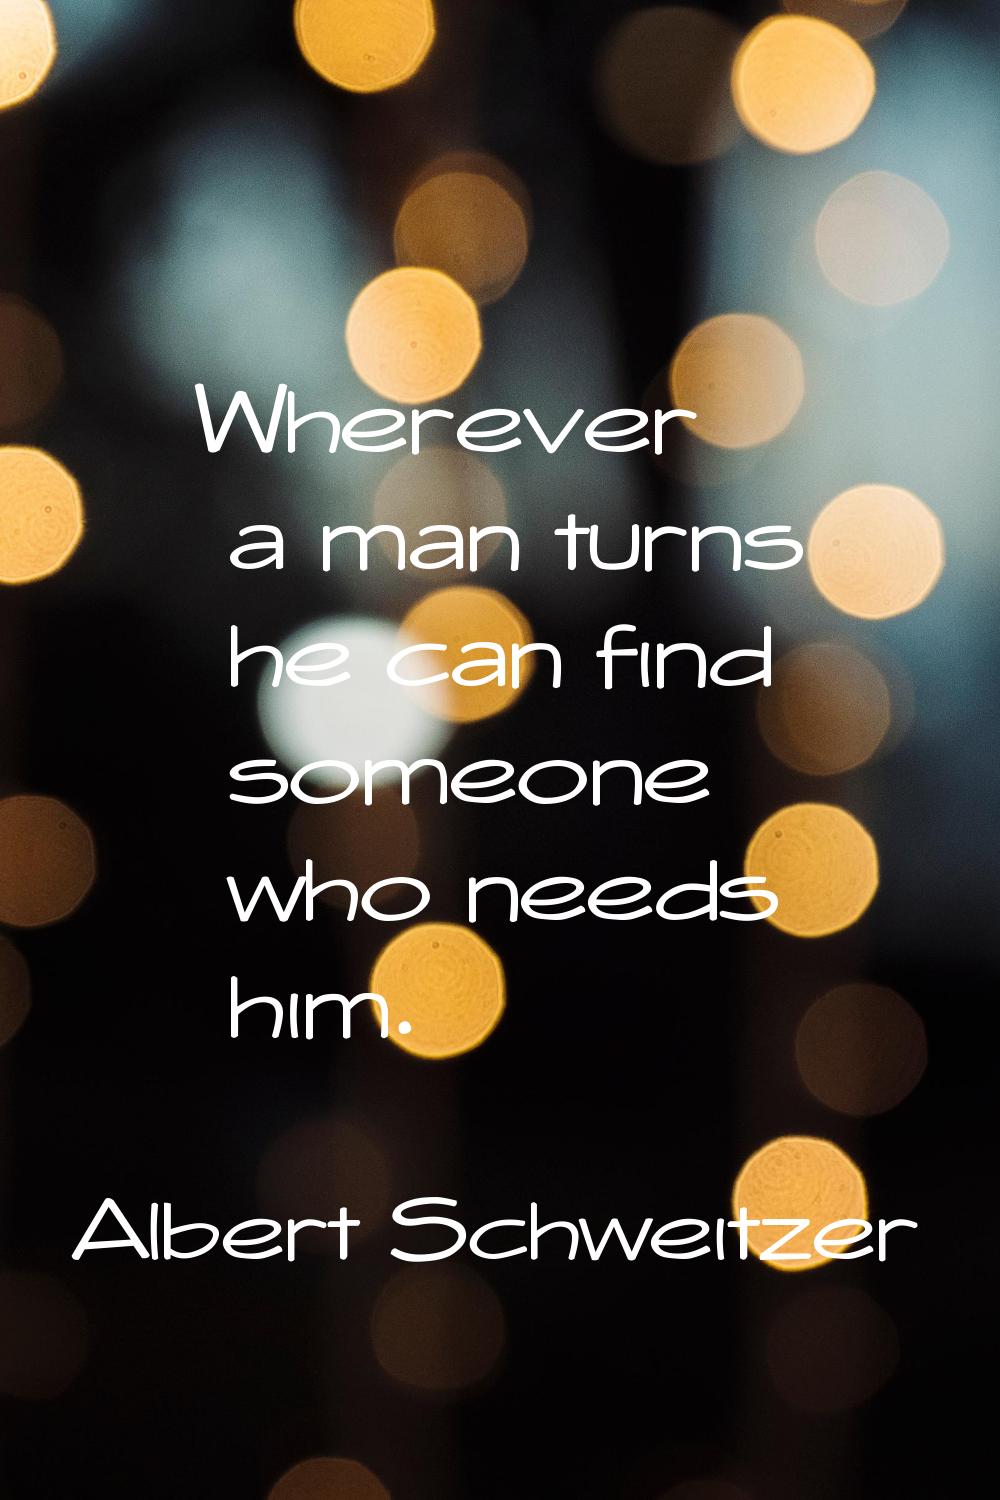 Wherever a man turns he can find someone who needs him.